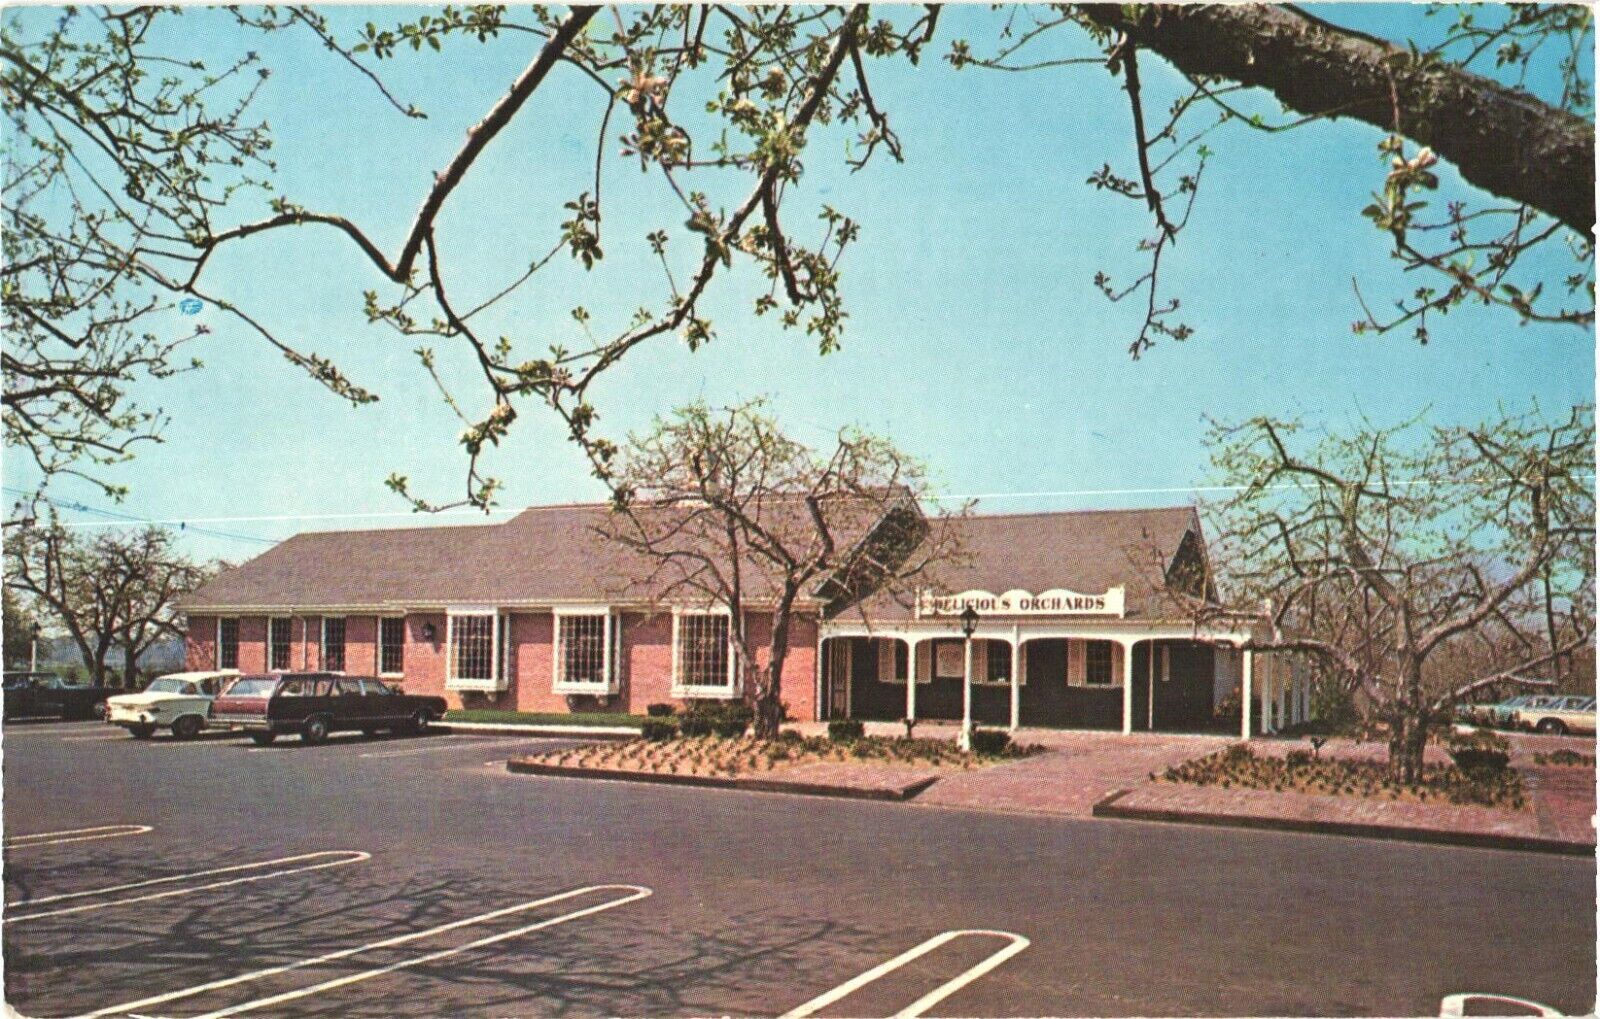 Façade of Delicious Orchards, Restaurant, Colts Neck, New Jersey Postcard